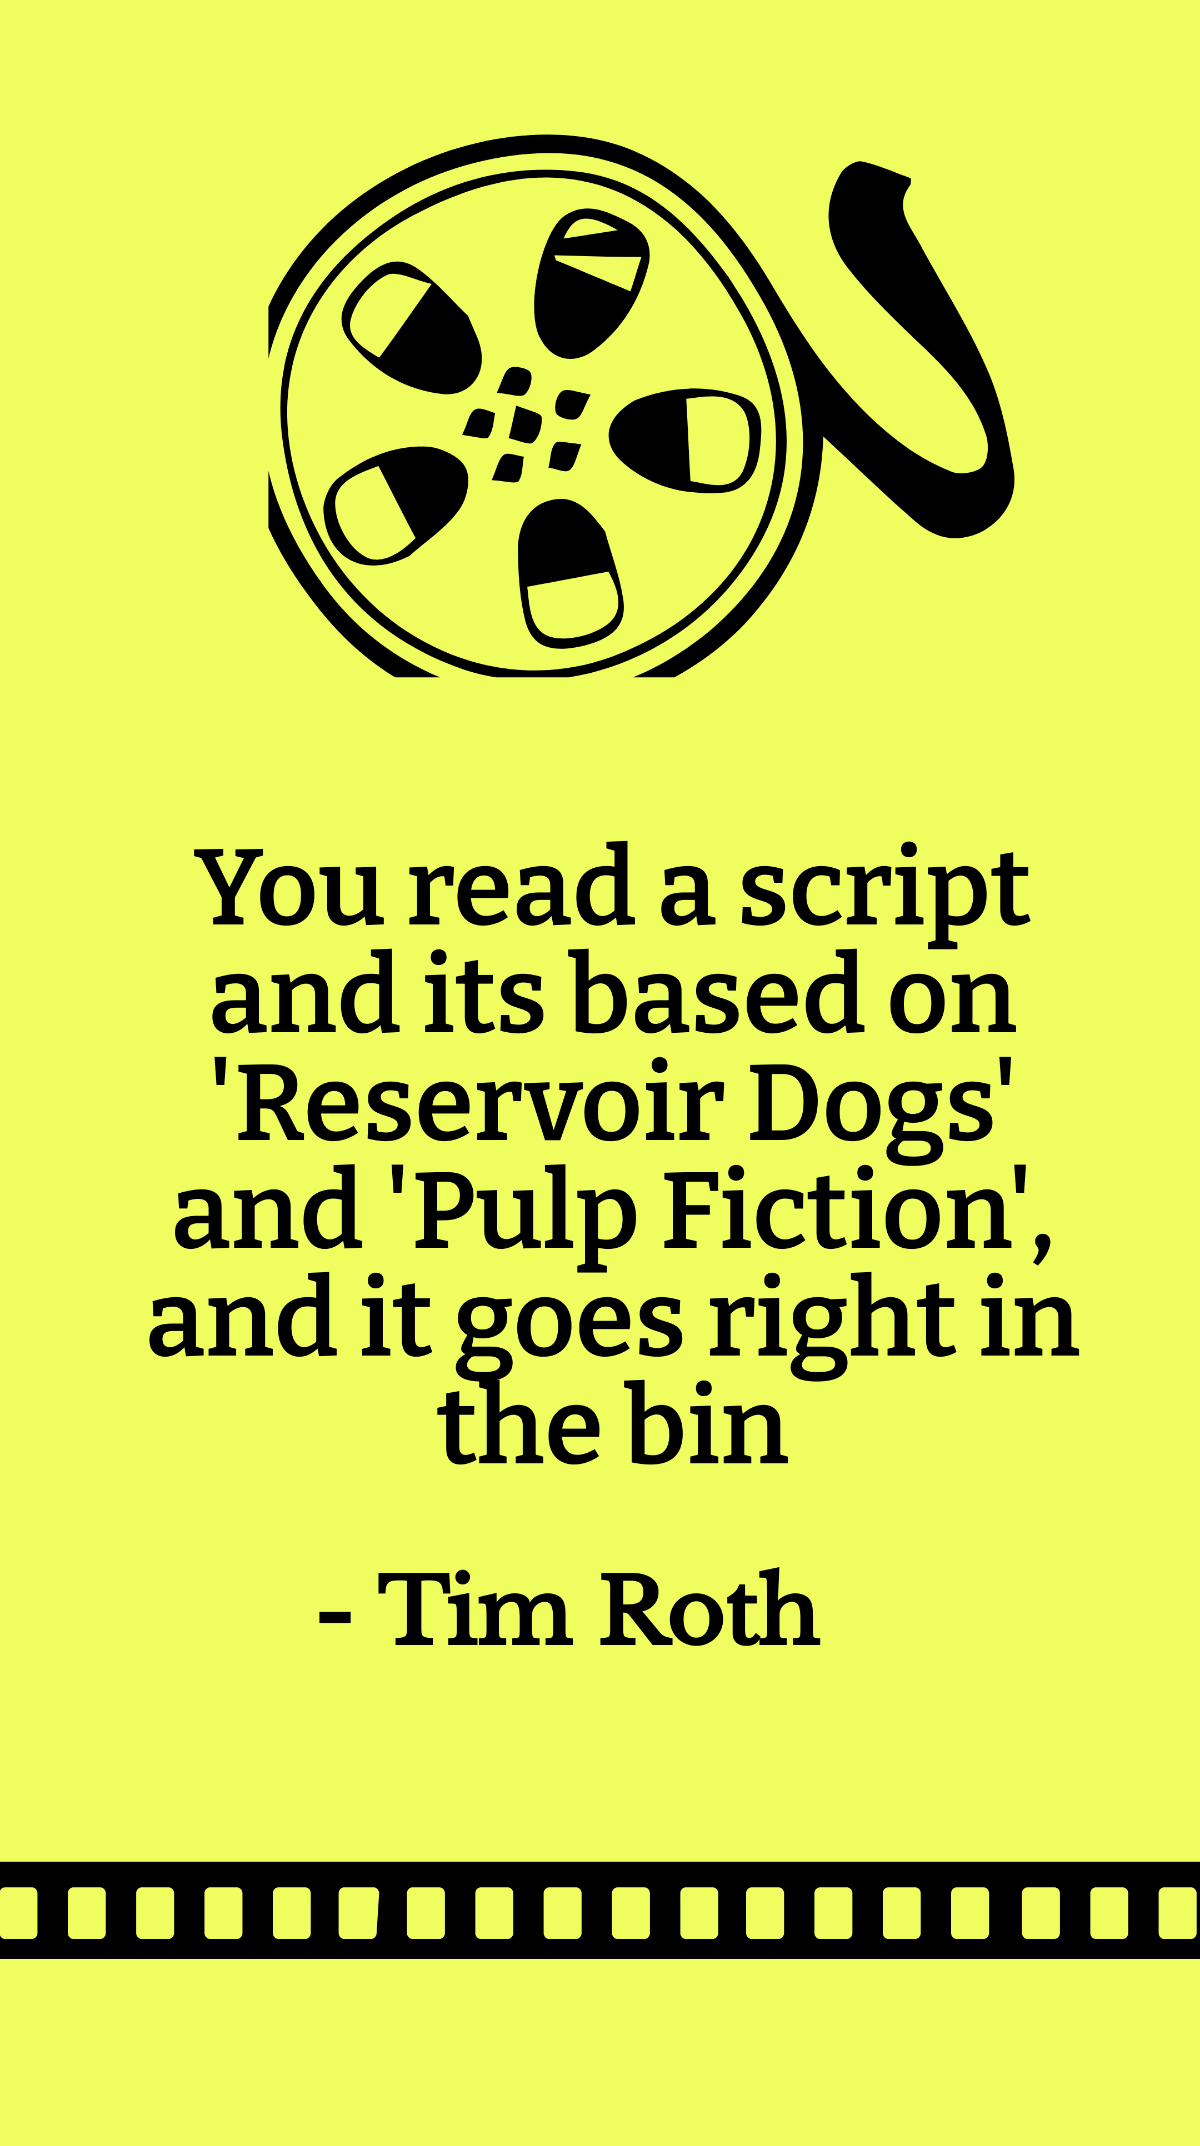 Tim Roth - You read a script and its based on 'Reservoir Dogs' and 'Pulp Fiction', and it goes right in the bin Template